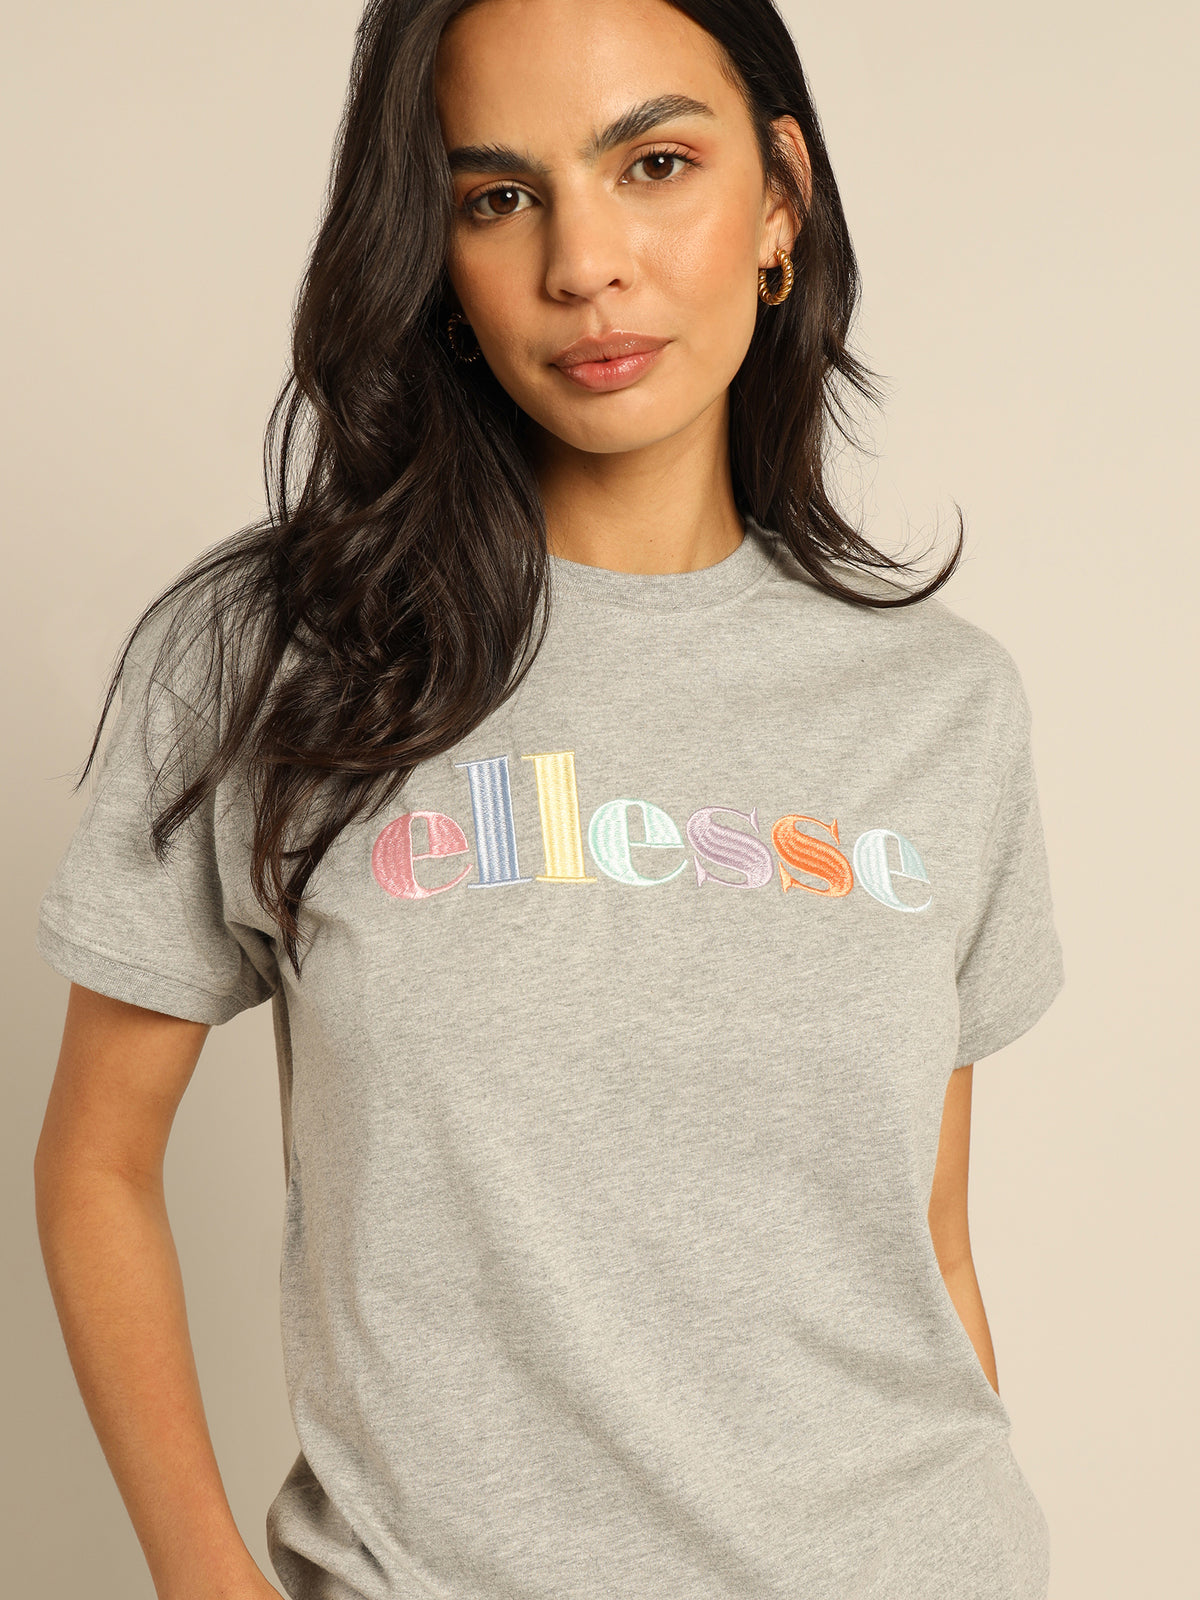 Changling T-Shirt in Grey Marle